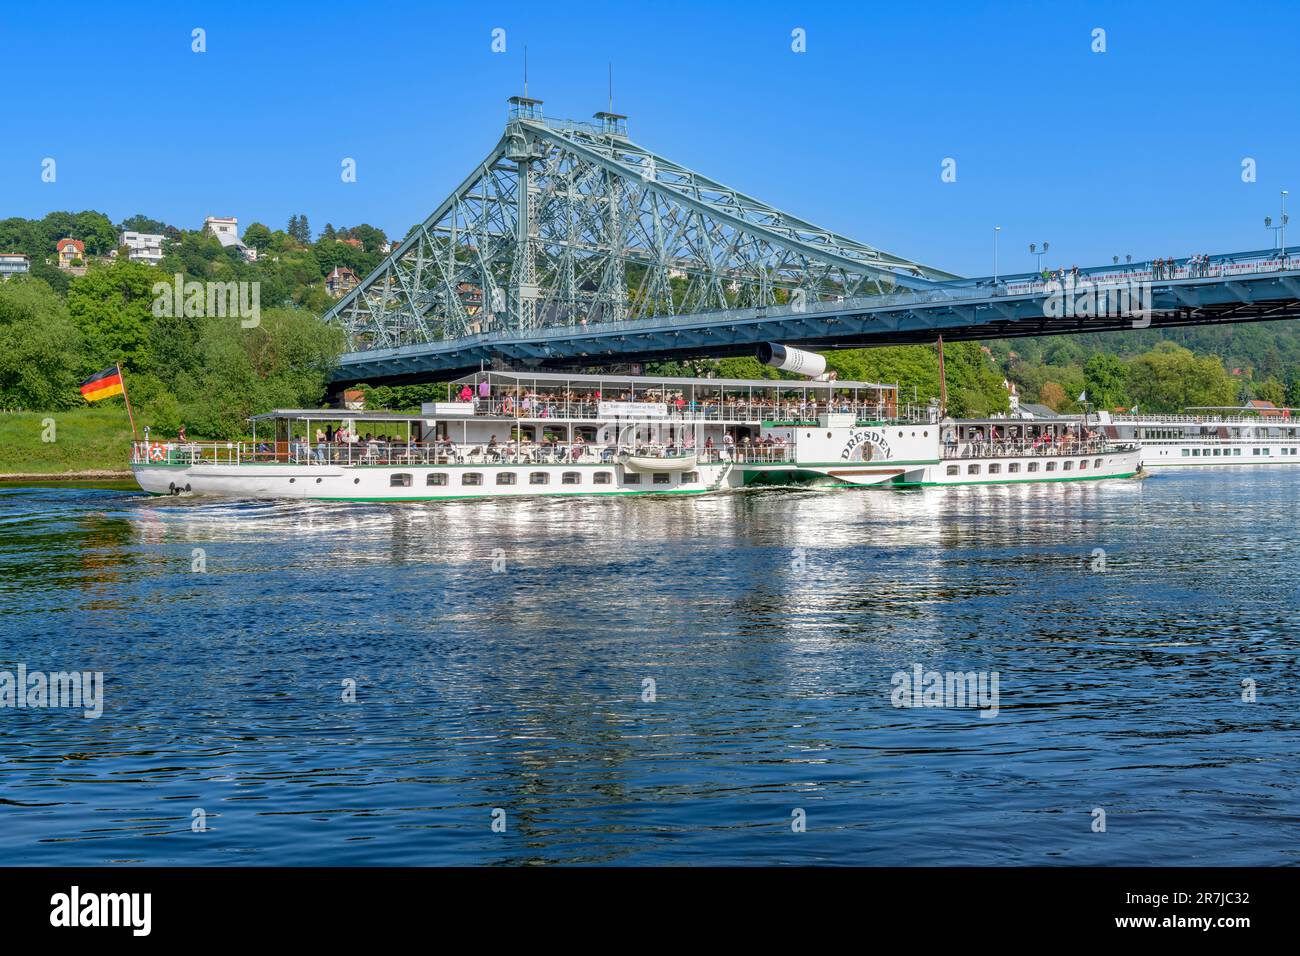 Paddle steamship Dresden with chimney lowered to sail under Loschwitz Bridge on the River Elbe. In the background is the leafy district of Loschwitz. Stock Photo